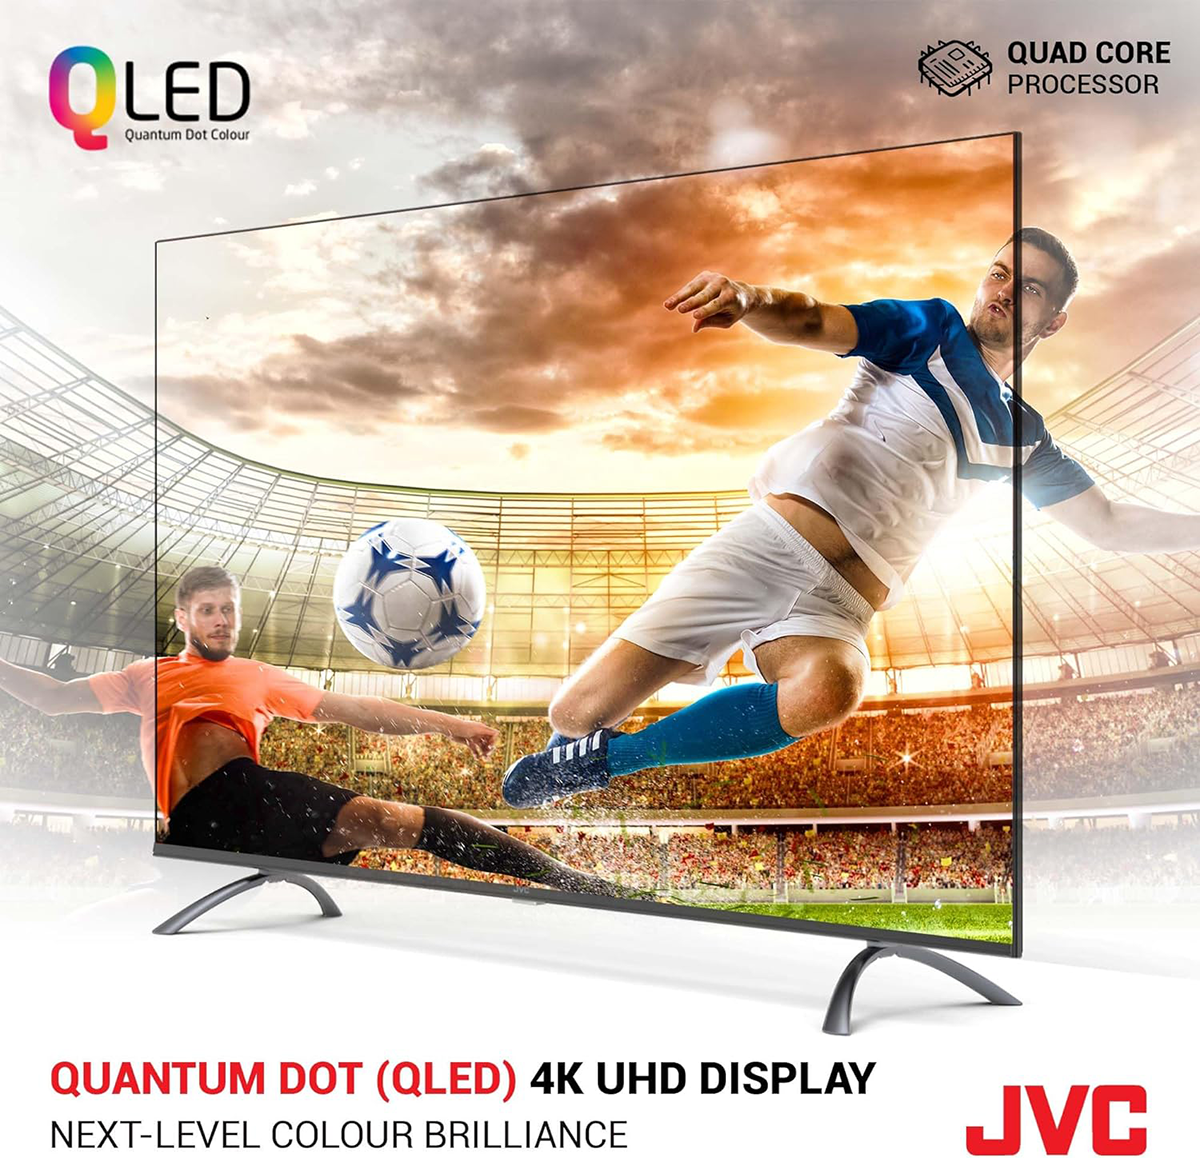 JVC 50 Inch Smart TV | 4K UHD Android TV with QLED AV-HQ507115A11